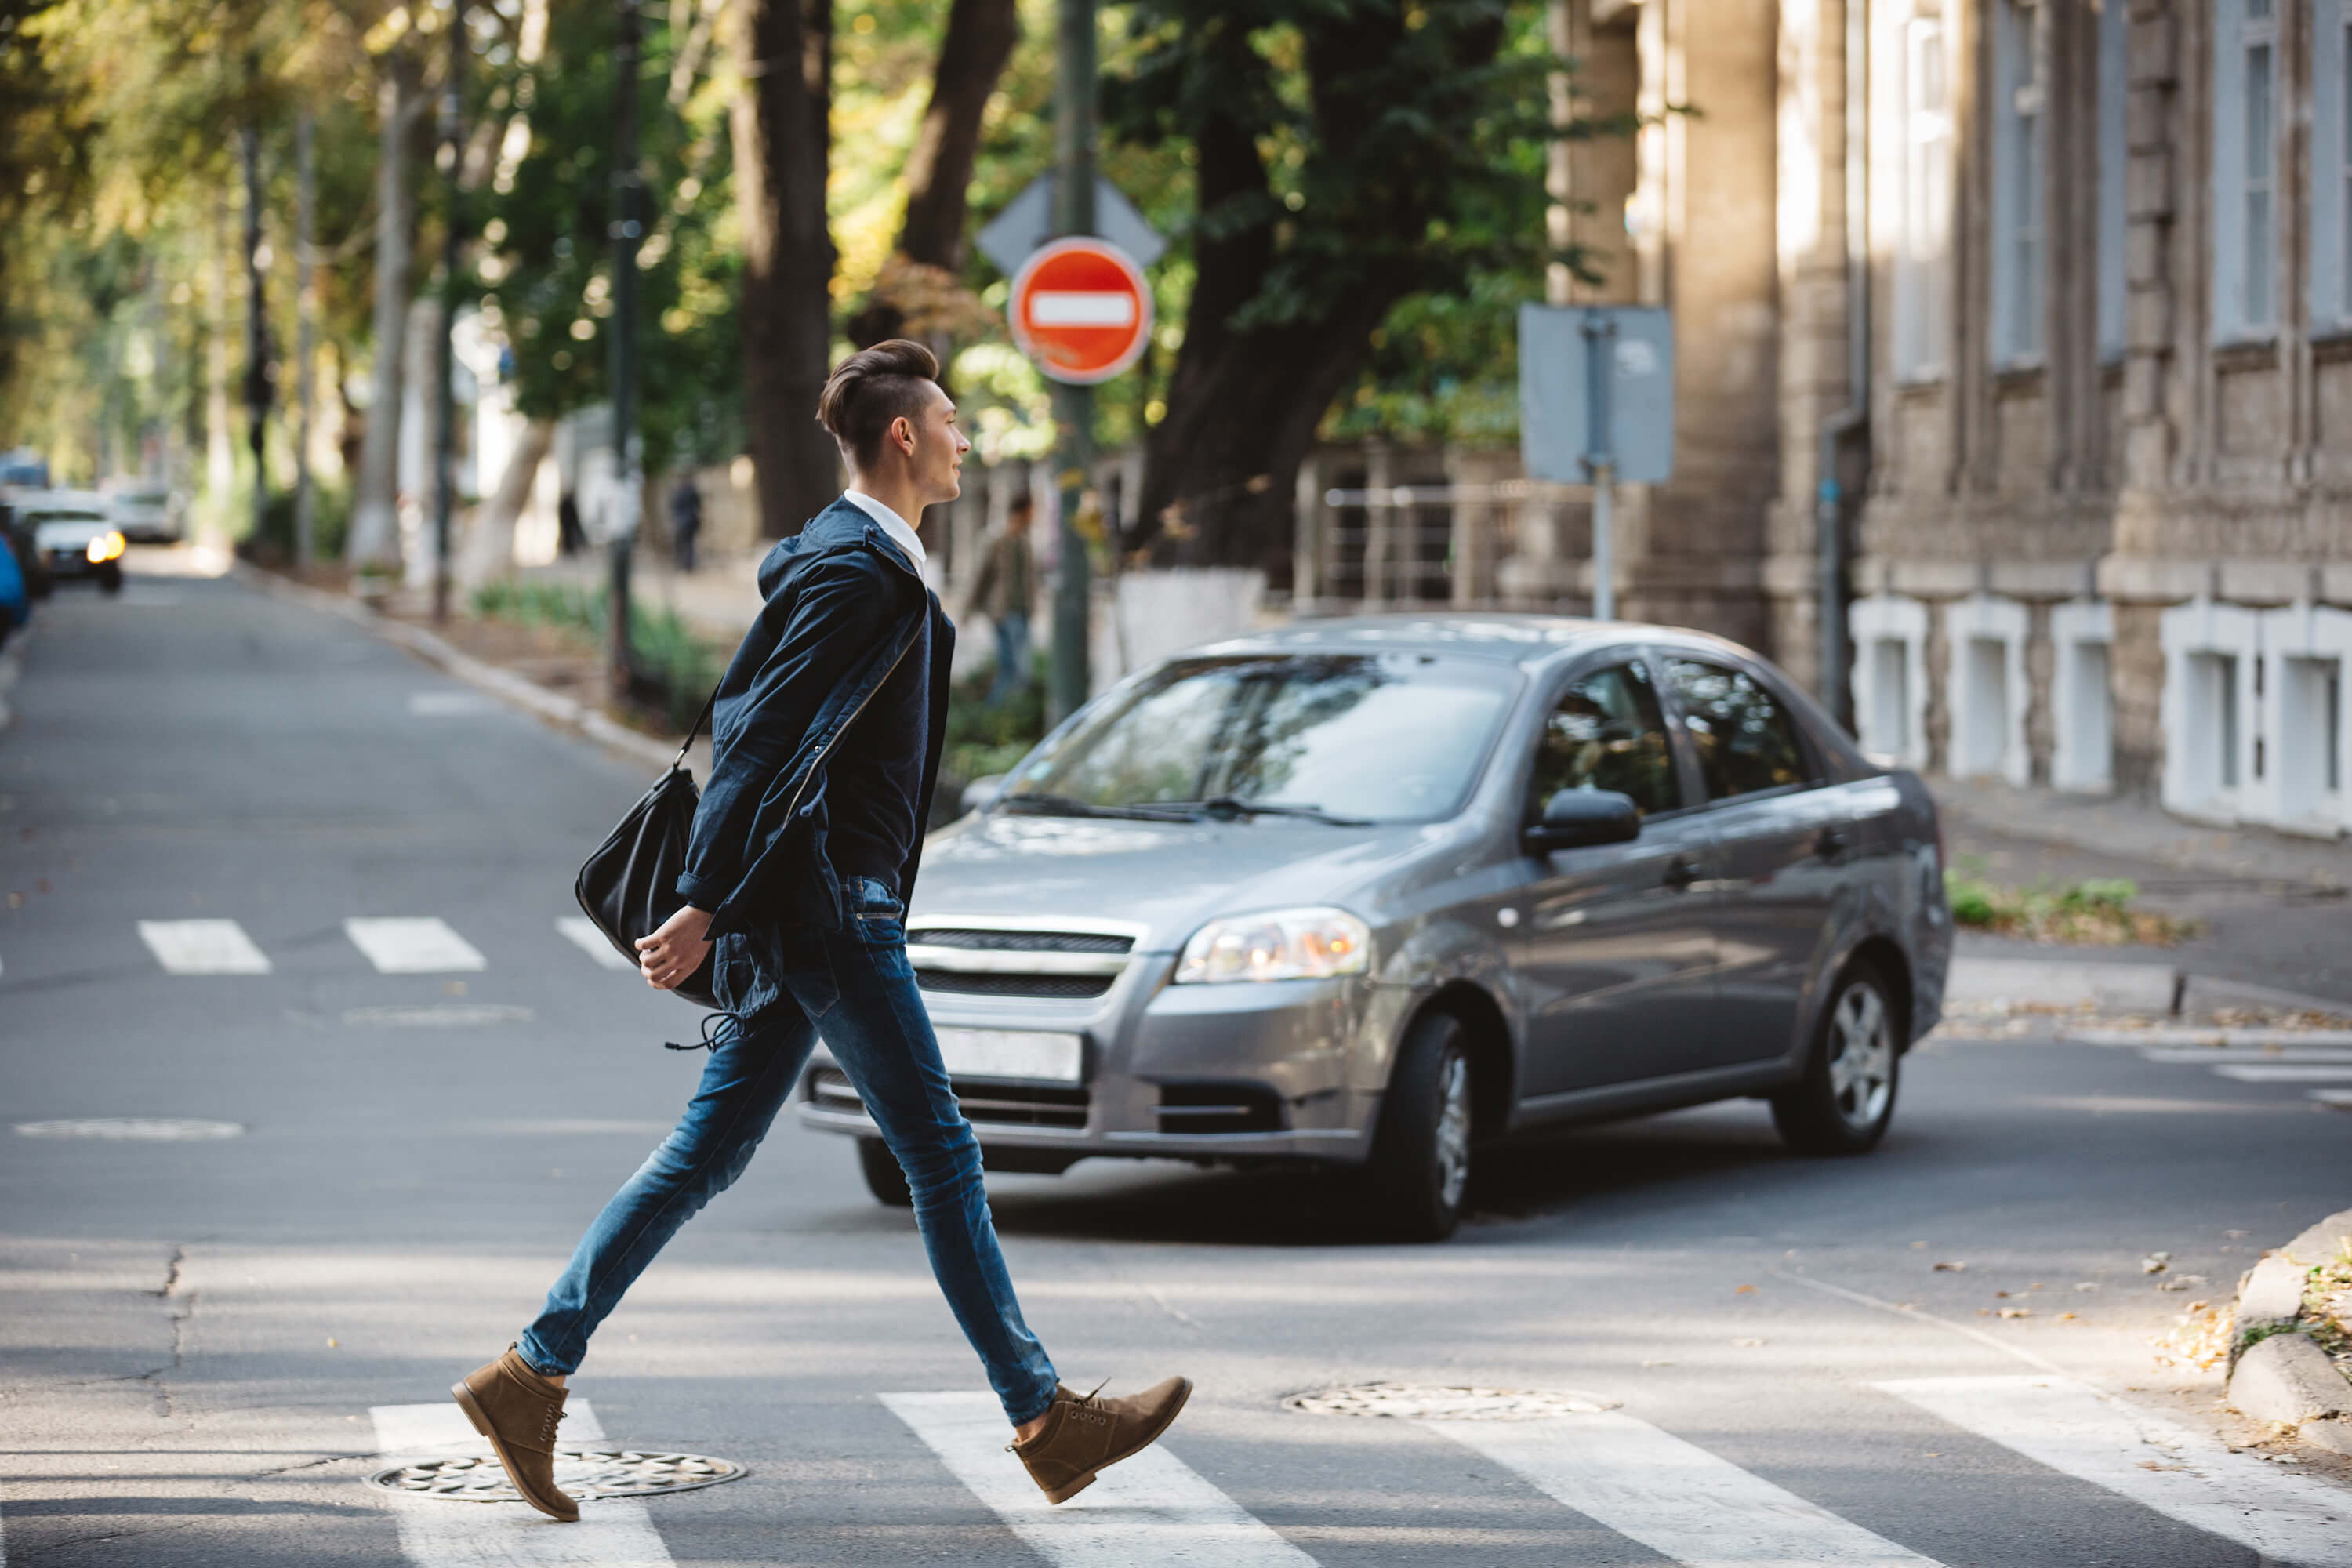 What Are the Effects of Distracted Walking on My Pedestrian Injury Claim?